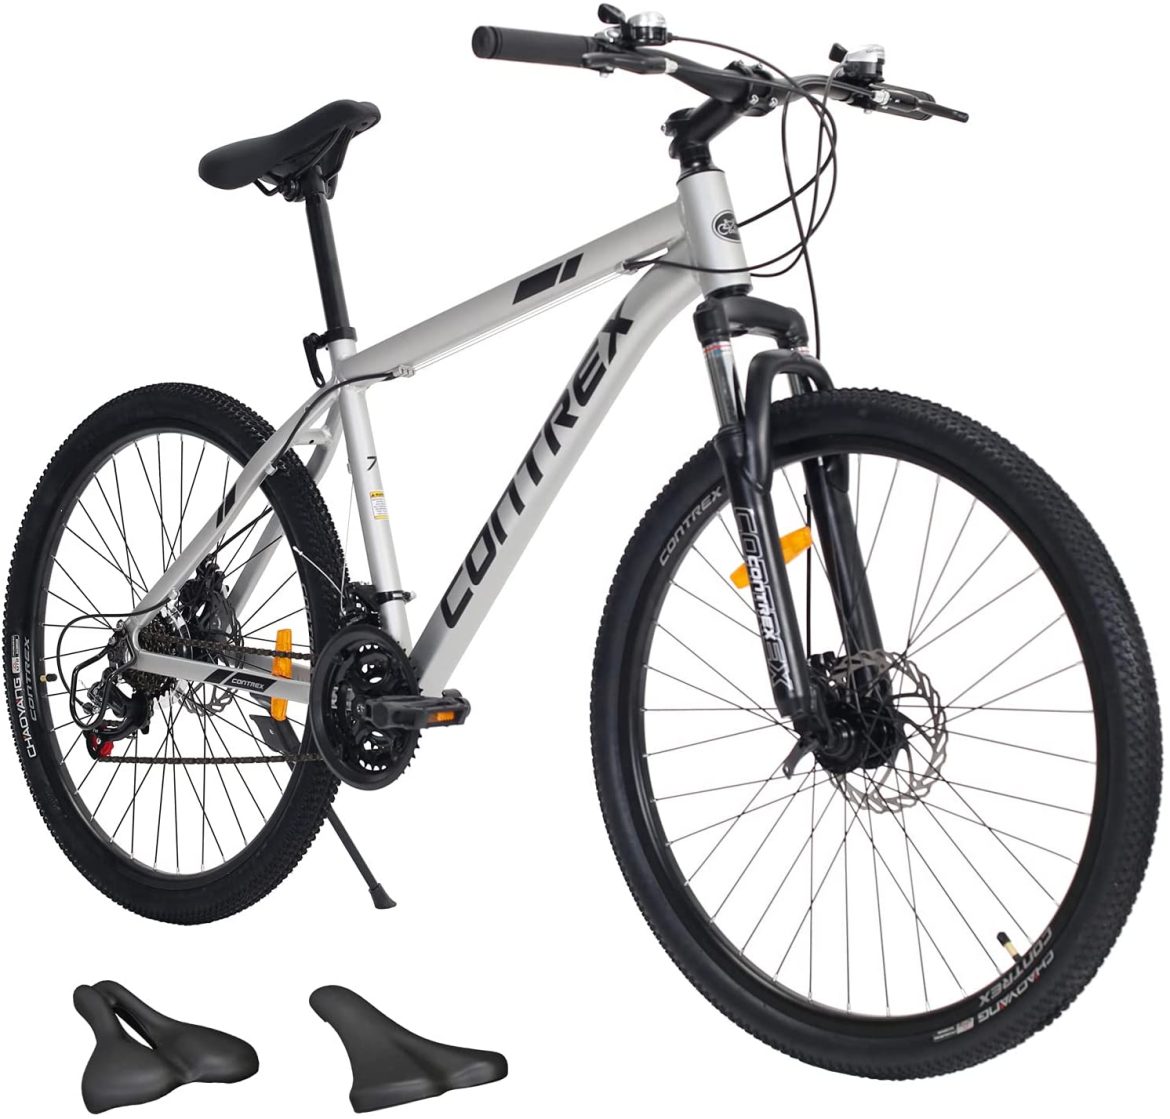 Cannondale Hybrid Bike: Complete Buying Guide